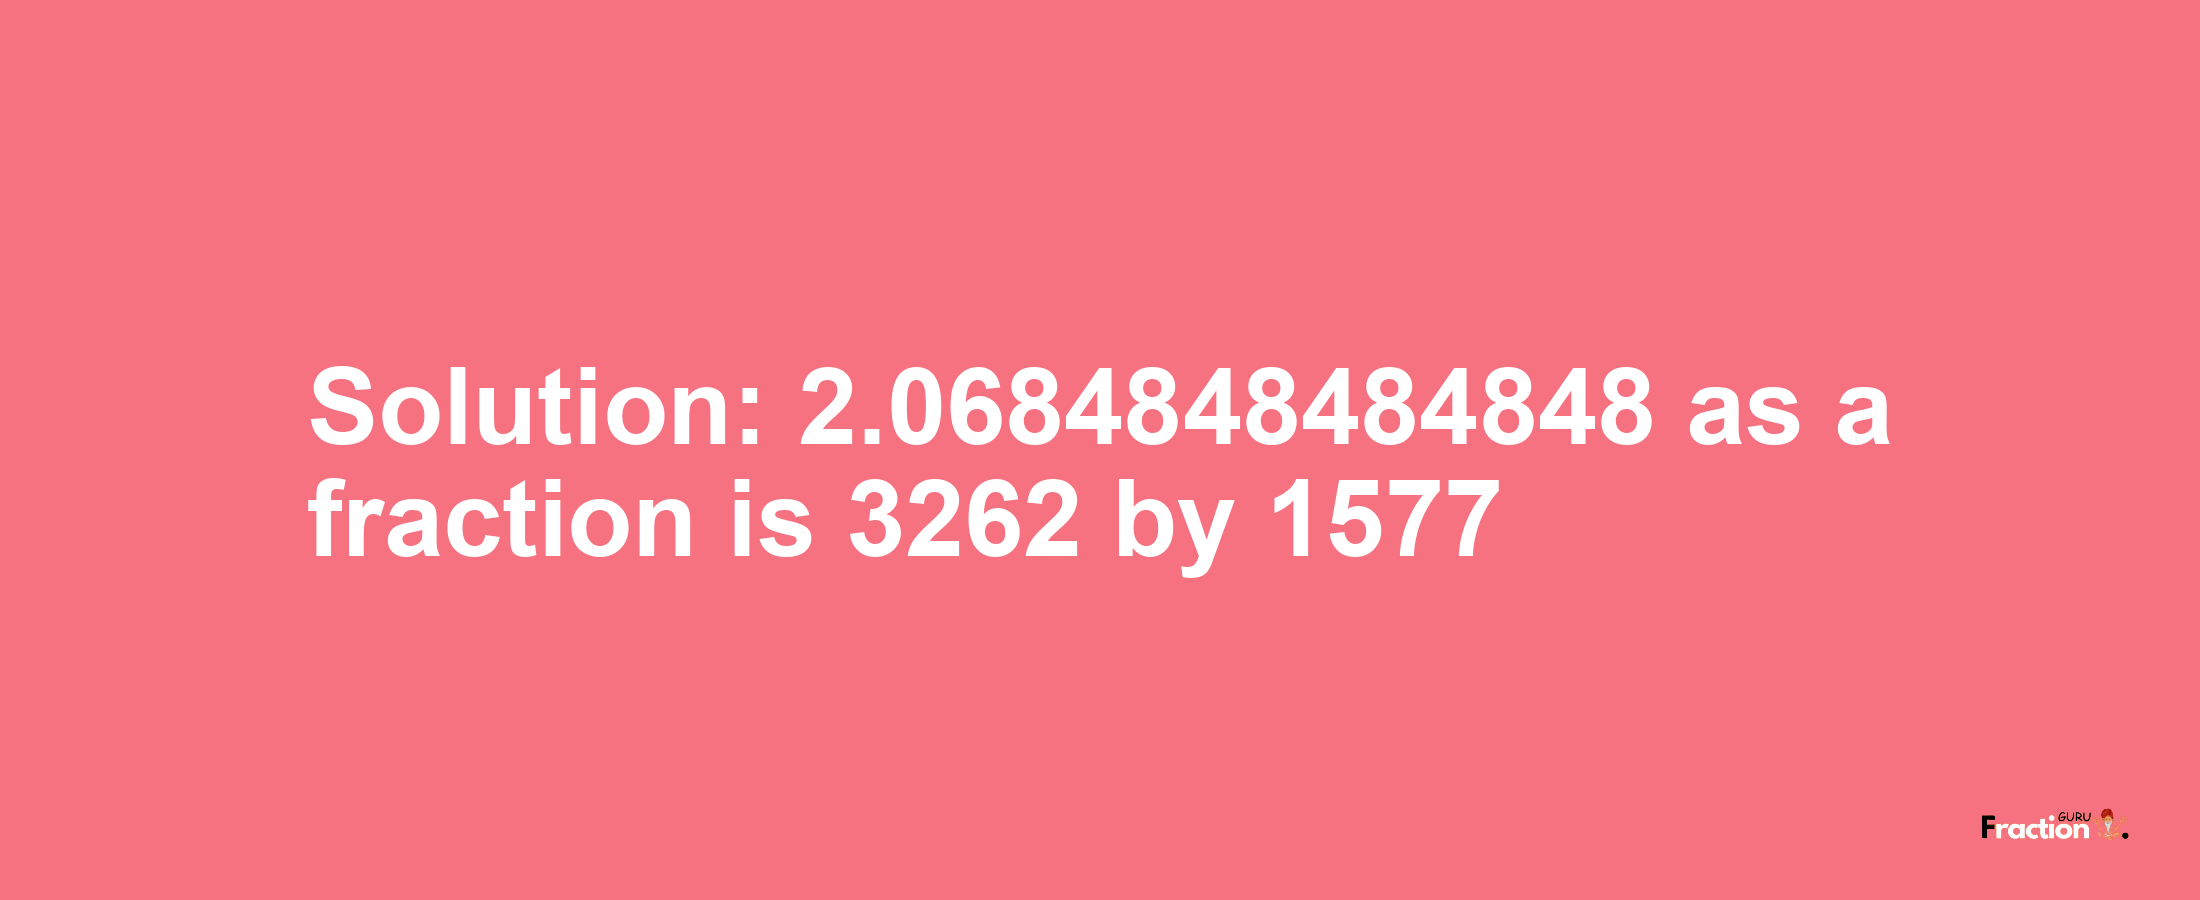 Solution:2.0684848484848 as a fraction is 3262/1577